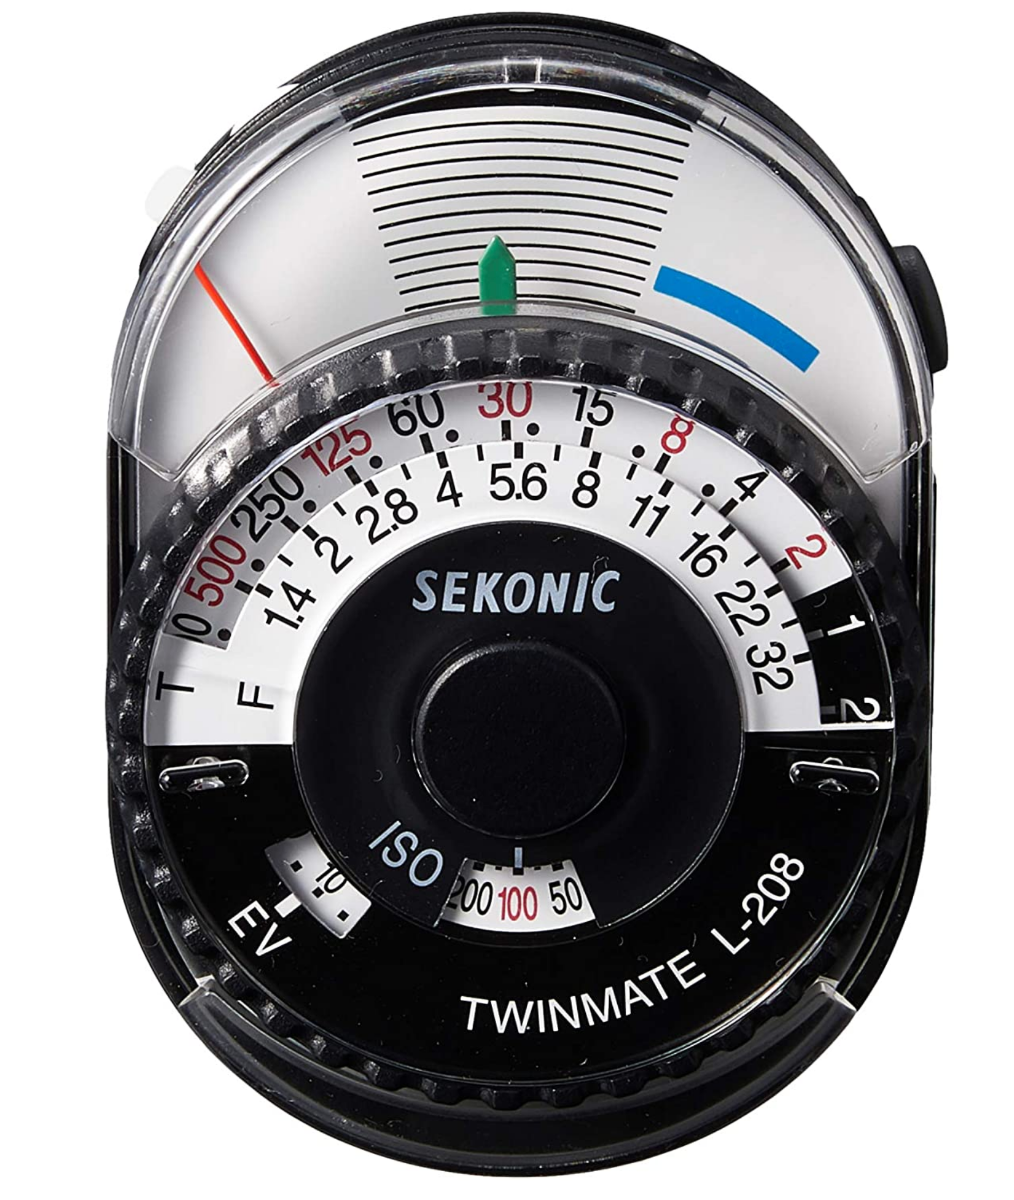 Product Image of Sekonic Twinmate L-208 Compact Analogue Light Meter, Black